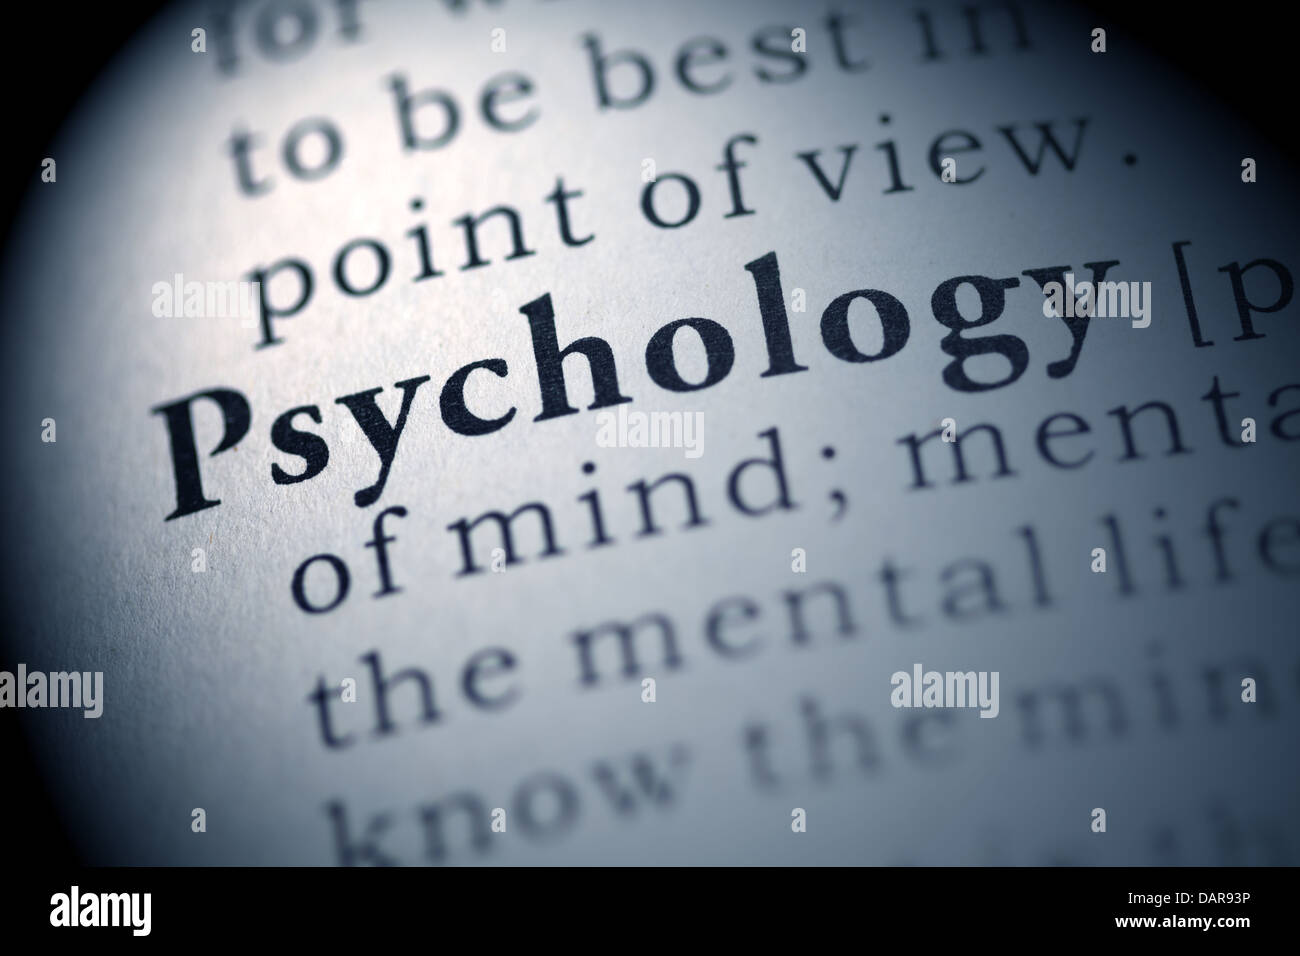 Fake Dictionary, Dictionary definition of the word Psychology. Stock Photo